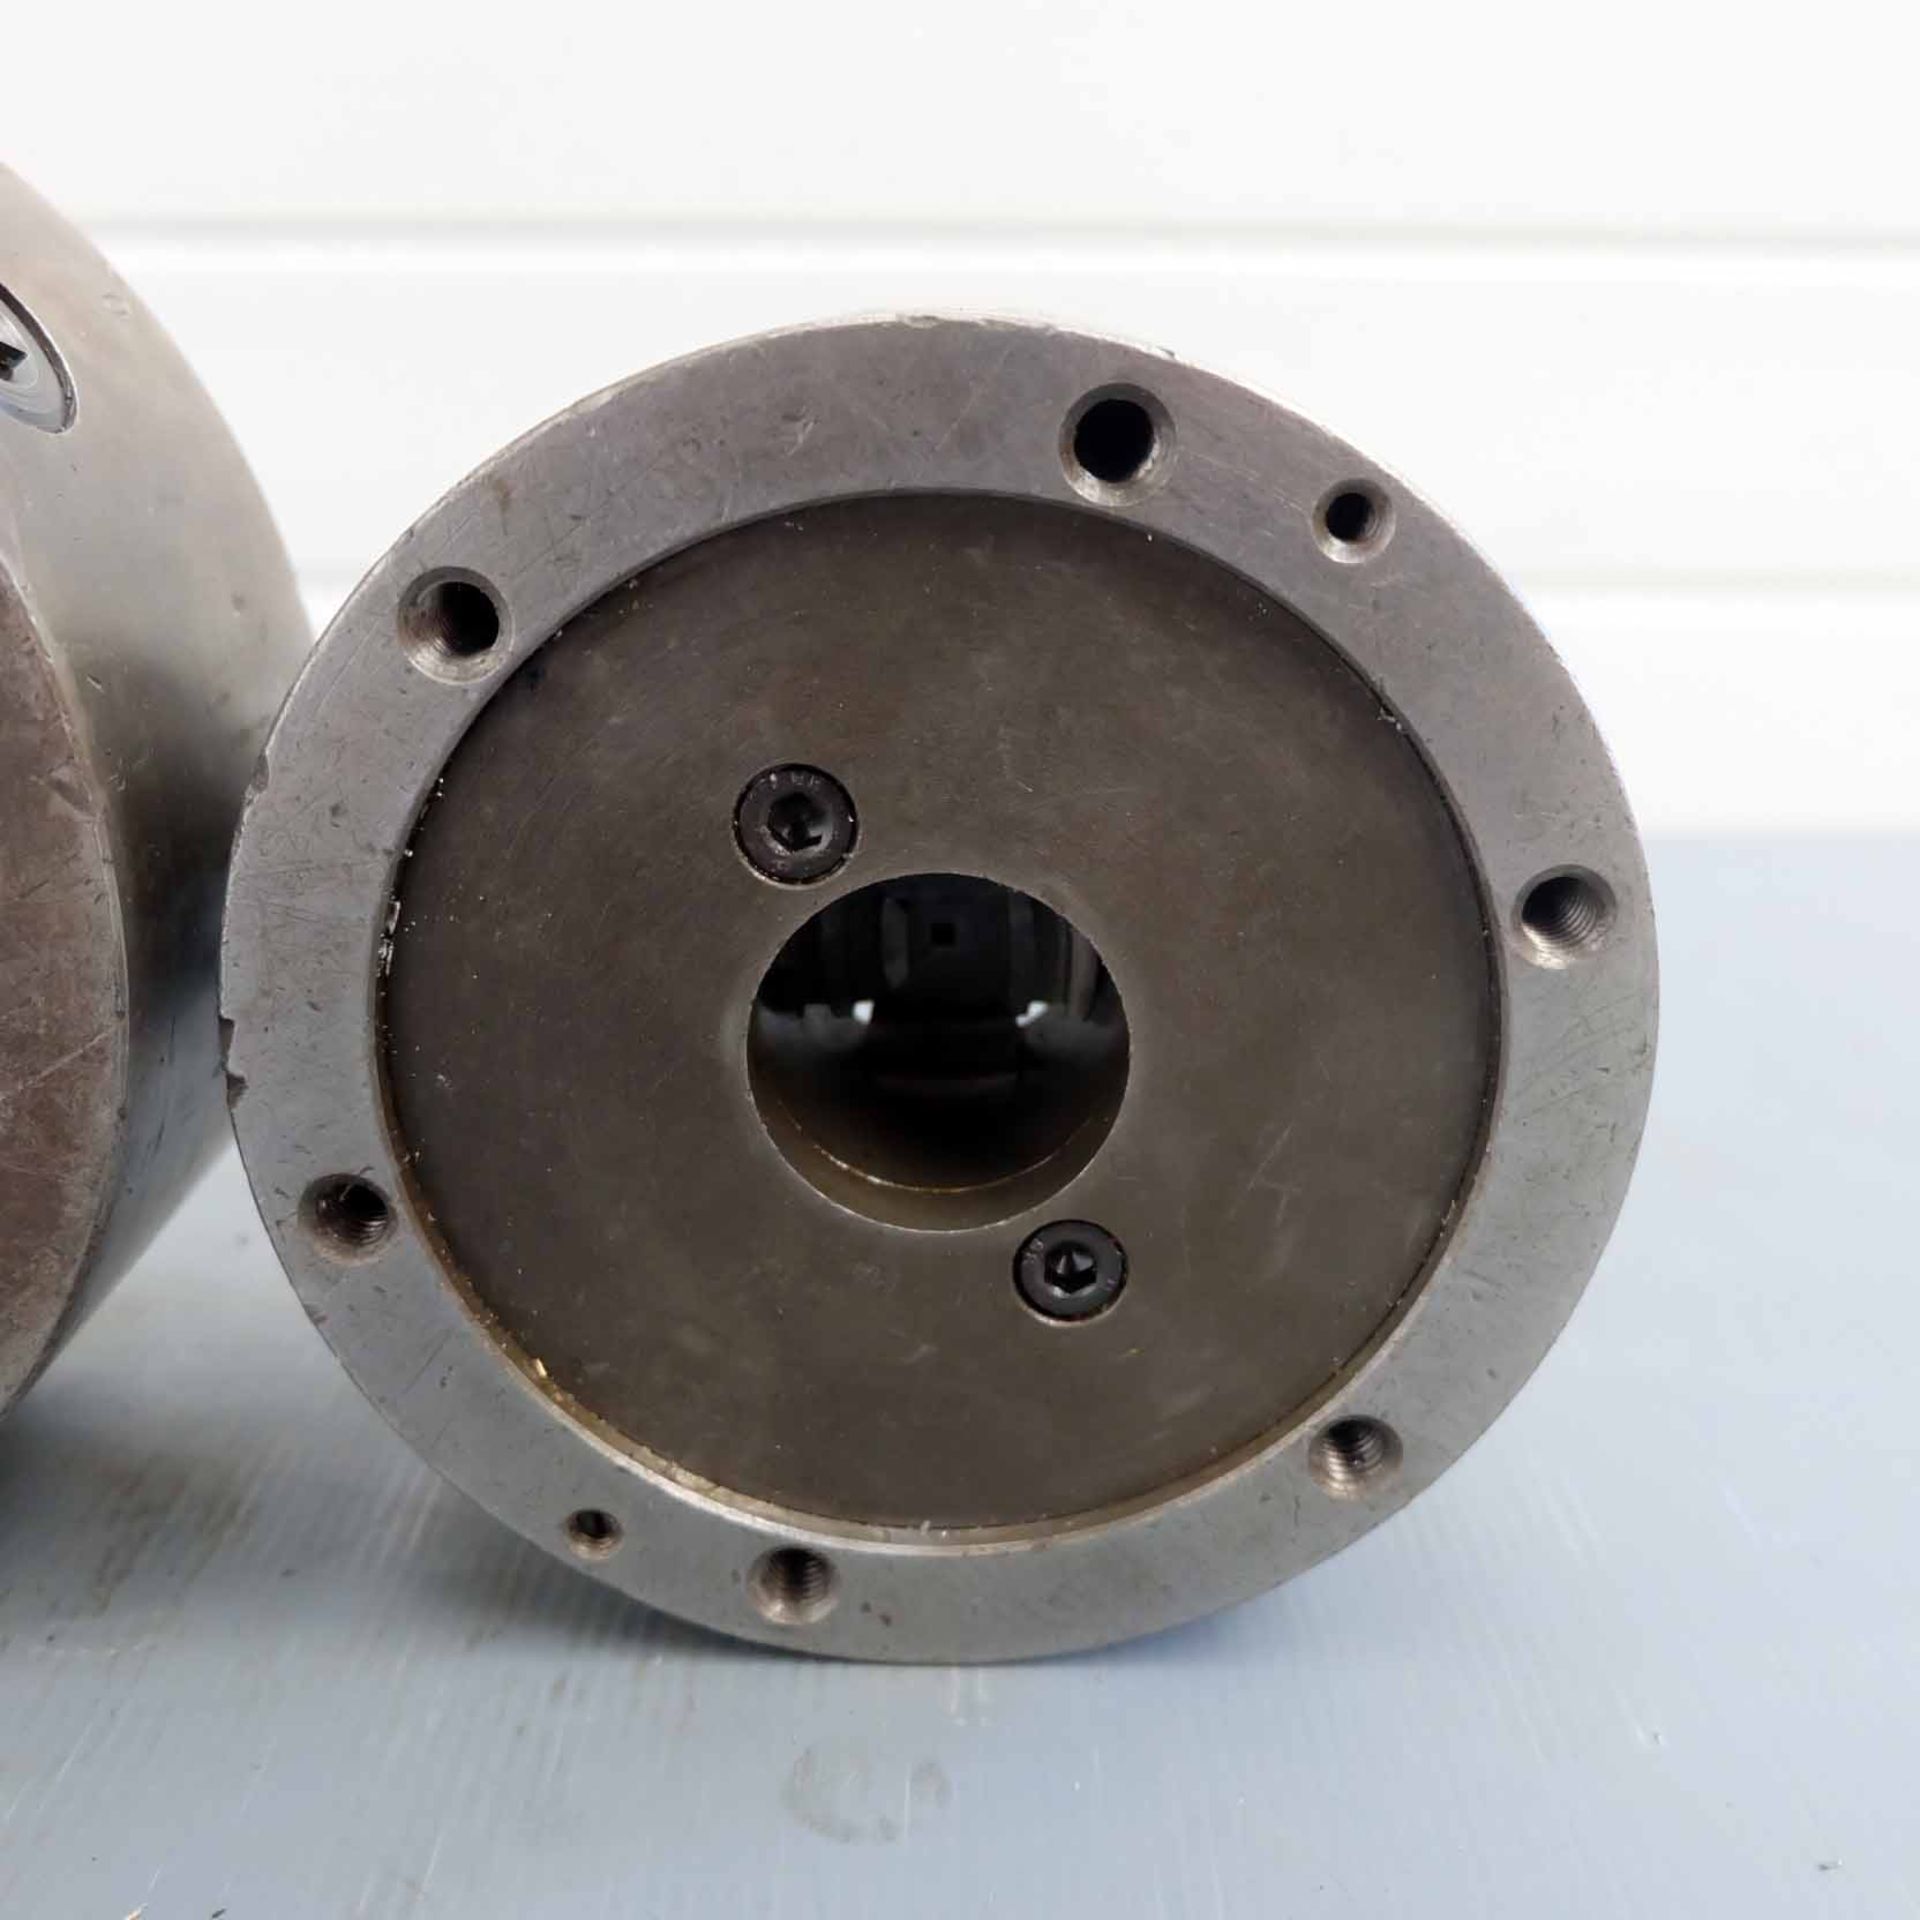 Two Self Centring 4 Jaw Scroll Chucks. Sizes 200mm & 160mm Diameter. - Image 7 of 7